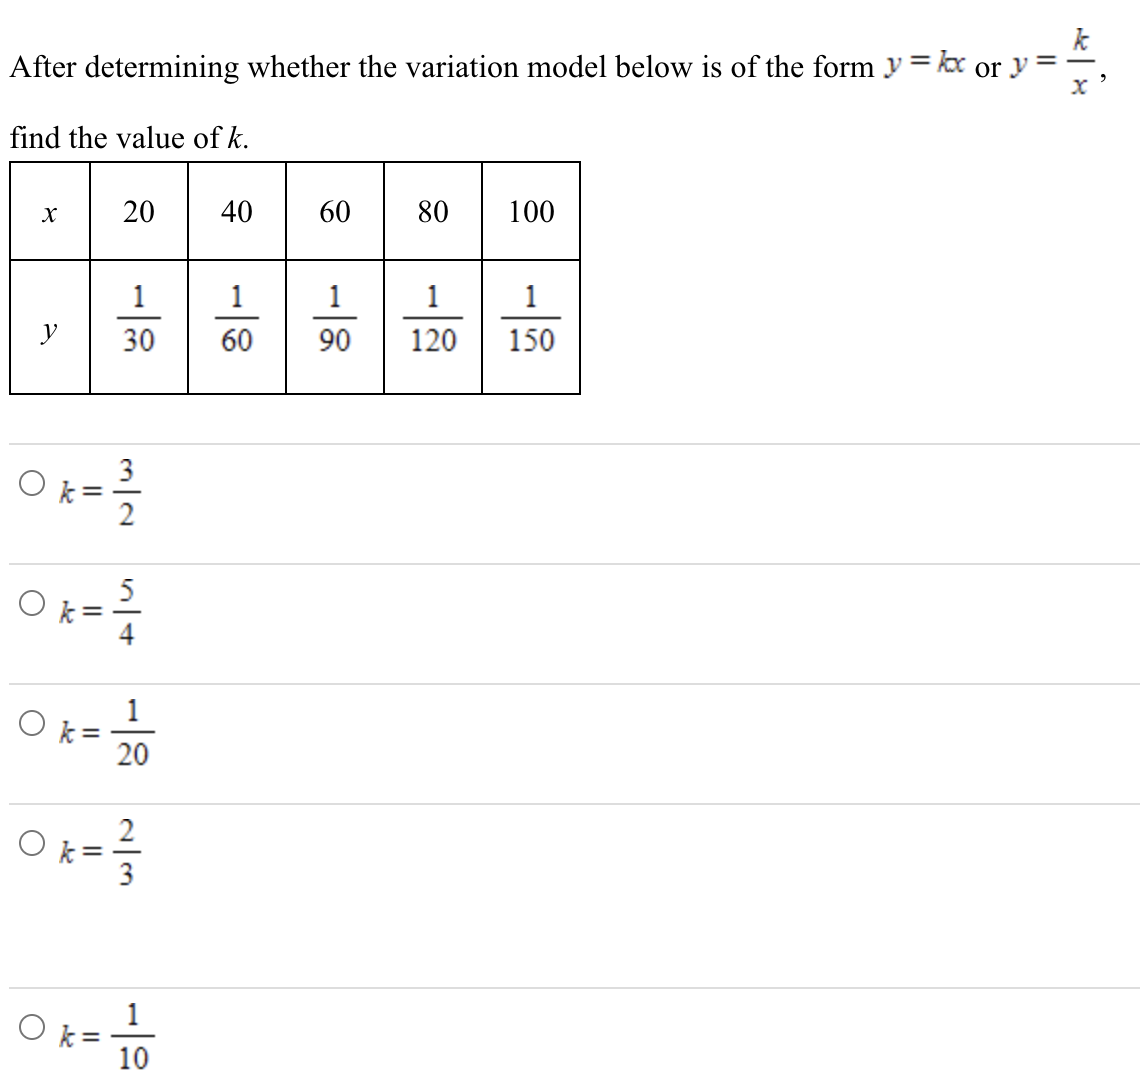 After determining whether the variation model below is of the form y = kx or y
v=²/²/₂
find the value of k.
X
2040
O
1
30
0=²1/
0x = ²
Ok=1/10
20
a|m
0x = ²/
10
1
60
60
1
90
80 100
1
120
1
150
|